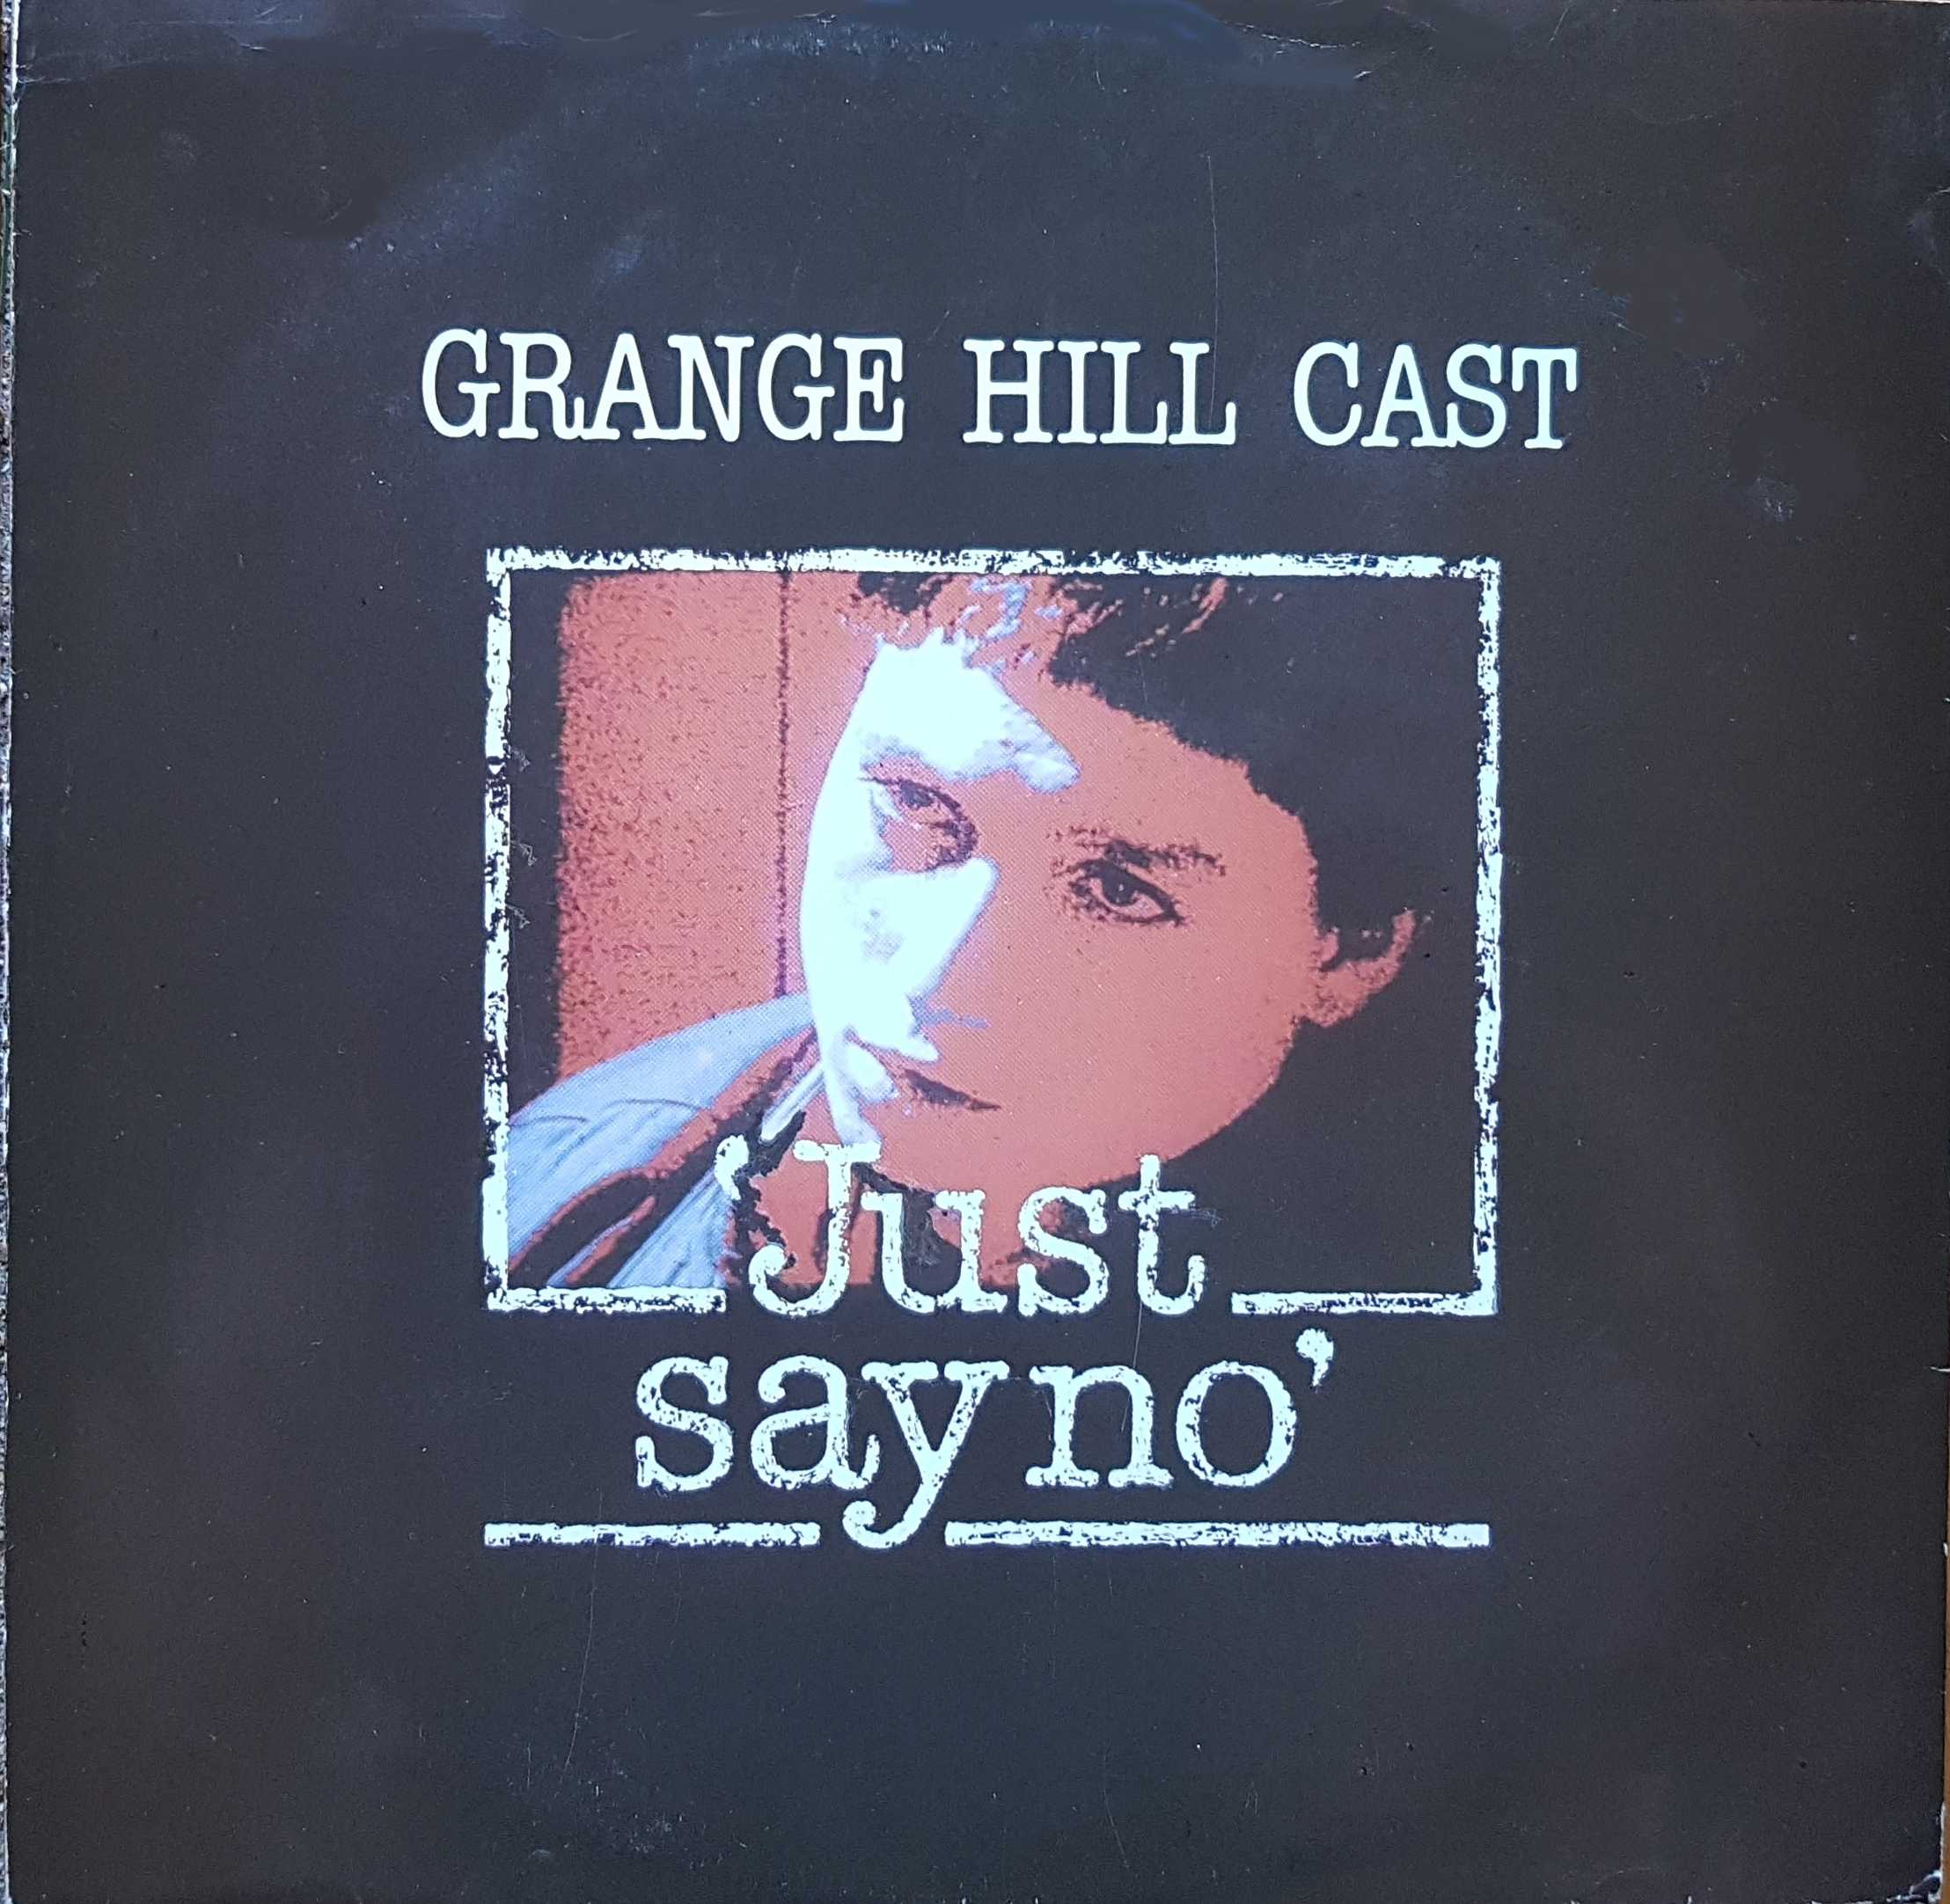 Picture of Just say no (Grange Hill) by artist Grogani / McMahon / Grange Hill cast from the BBC 12inches - Records and Tapes library